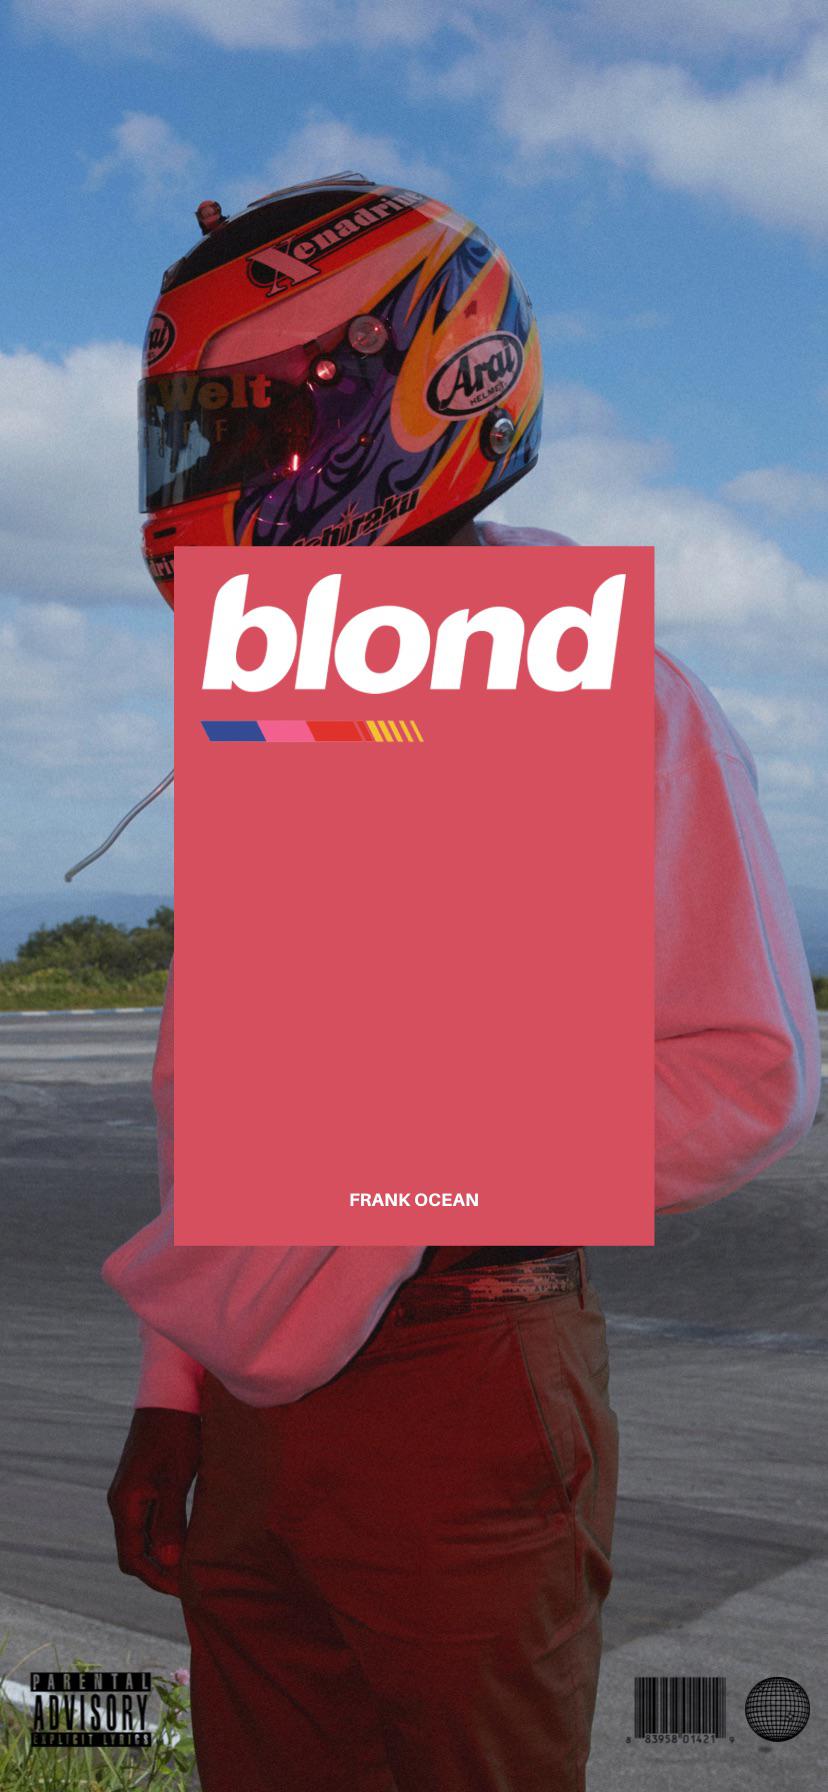 Made this blond iPhone wallpaper, pretty happy with it